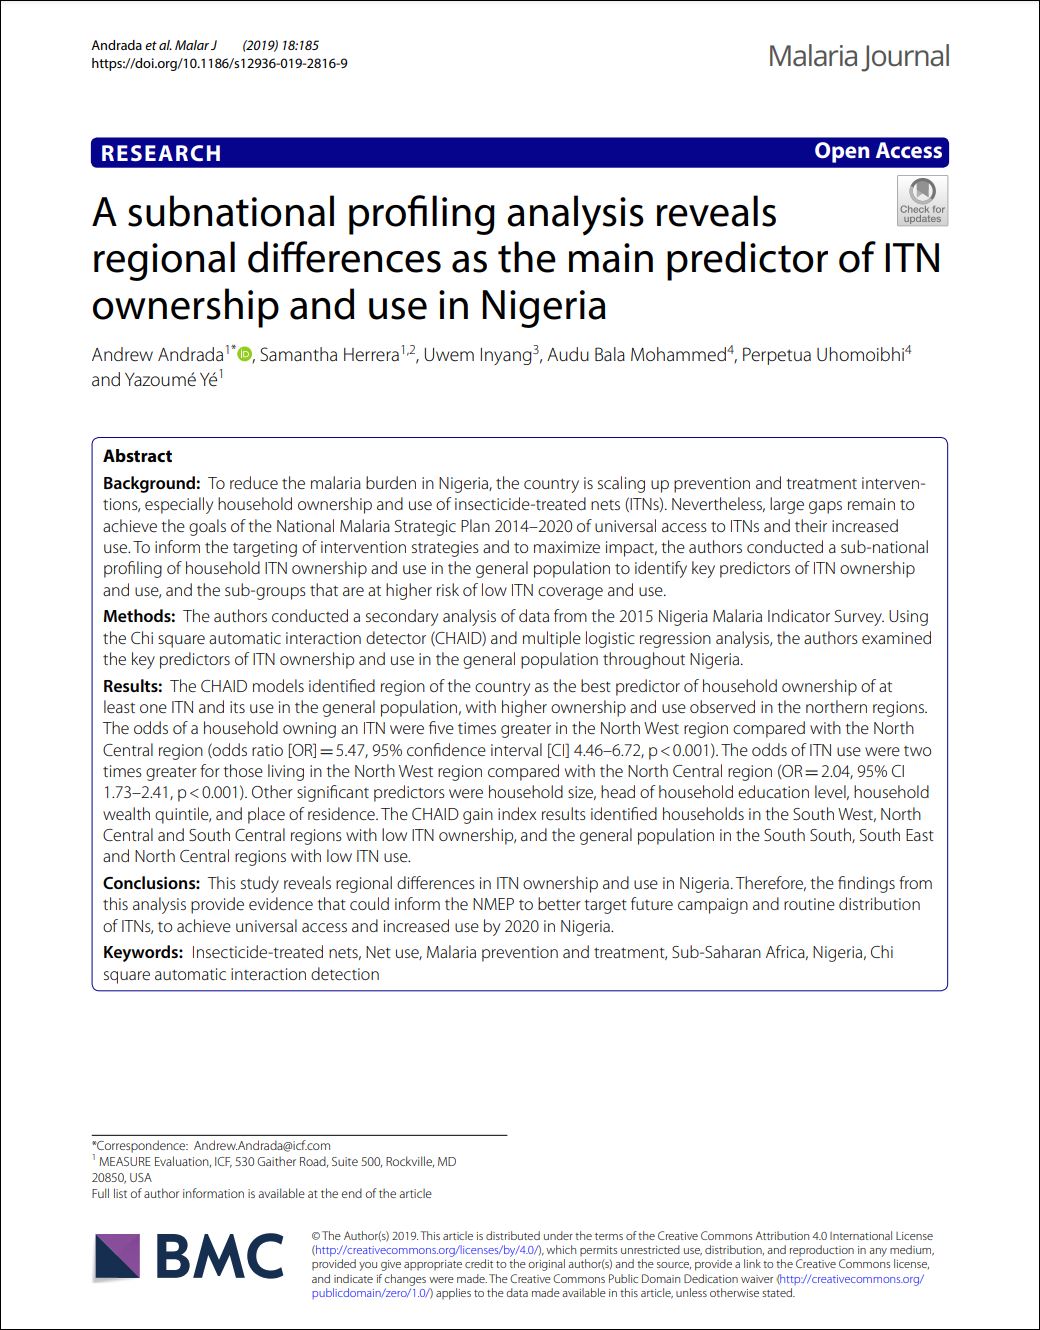 A subnational profiling analysis reveals regional differences as the main predictor of ITN ownership and use in Nigeria